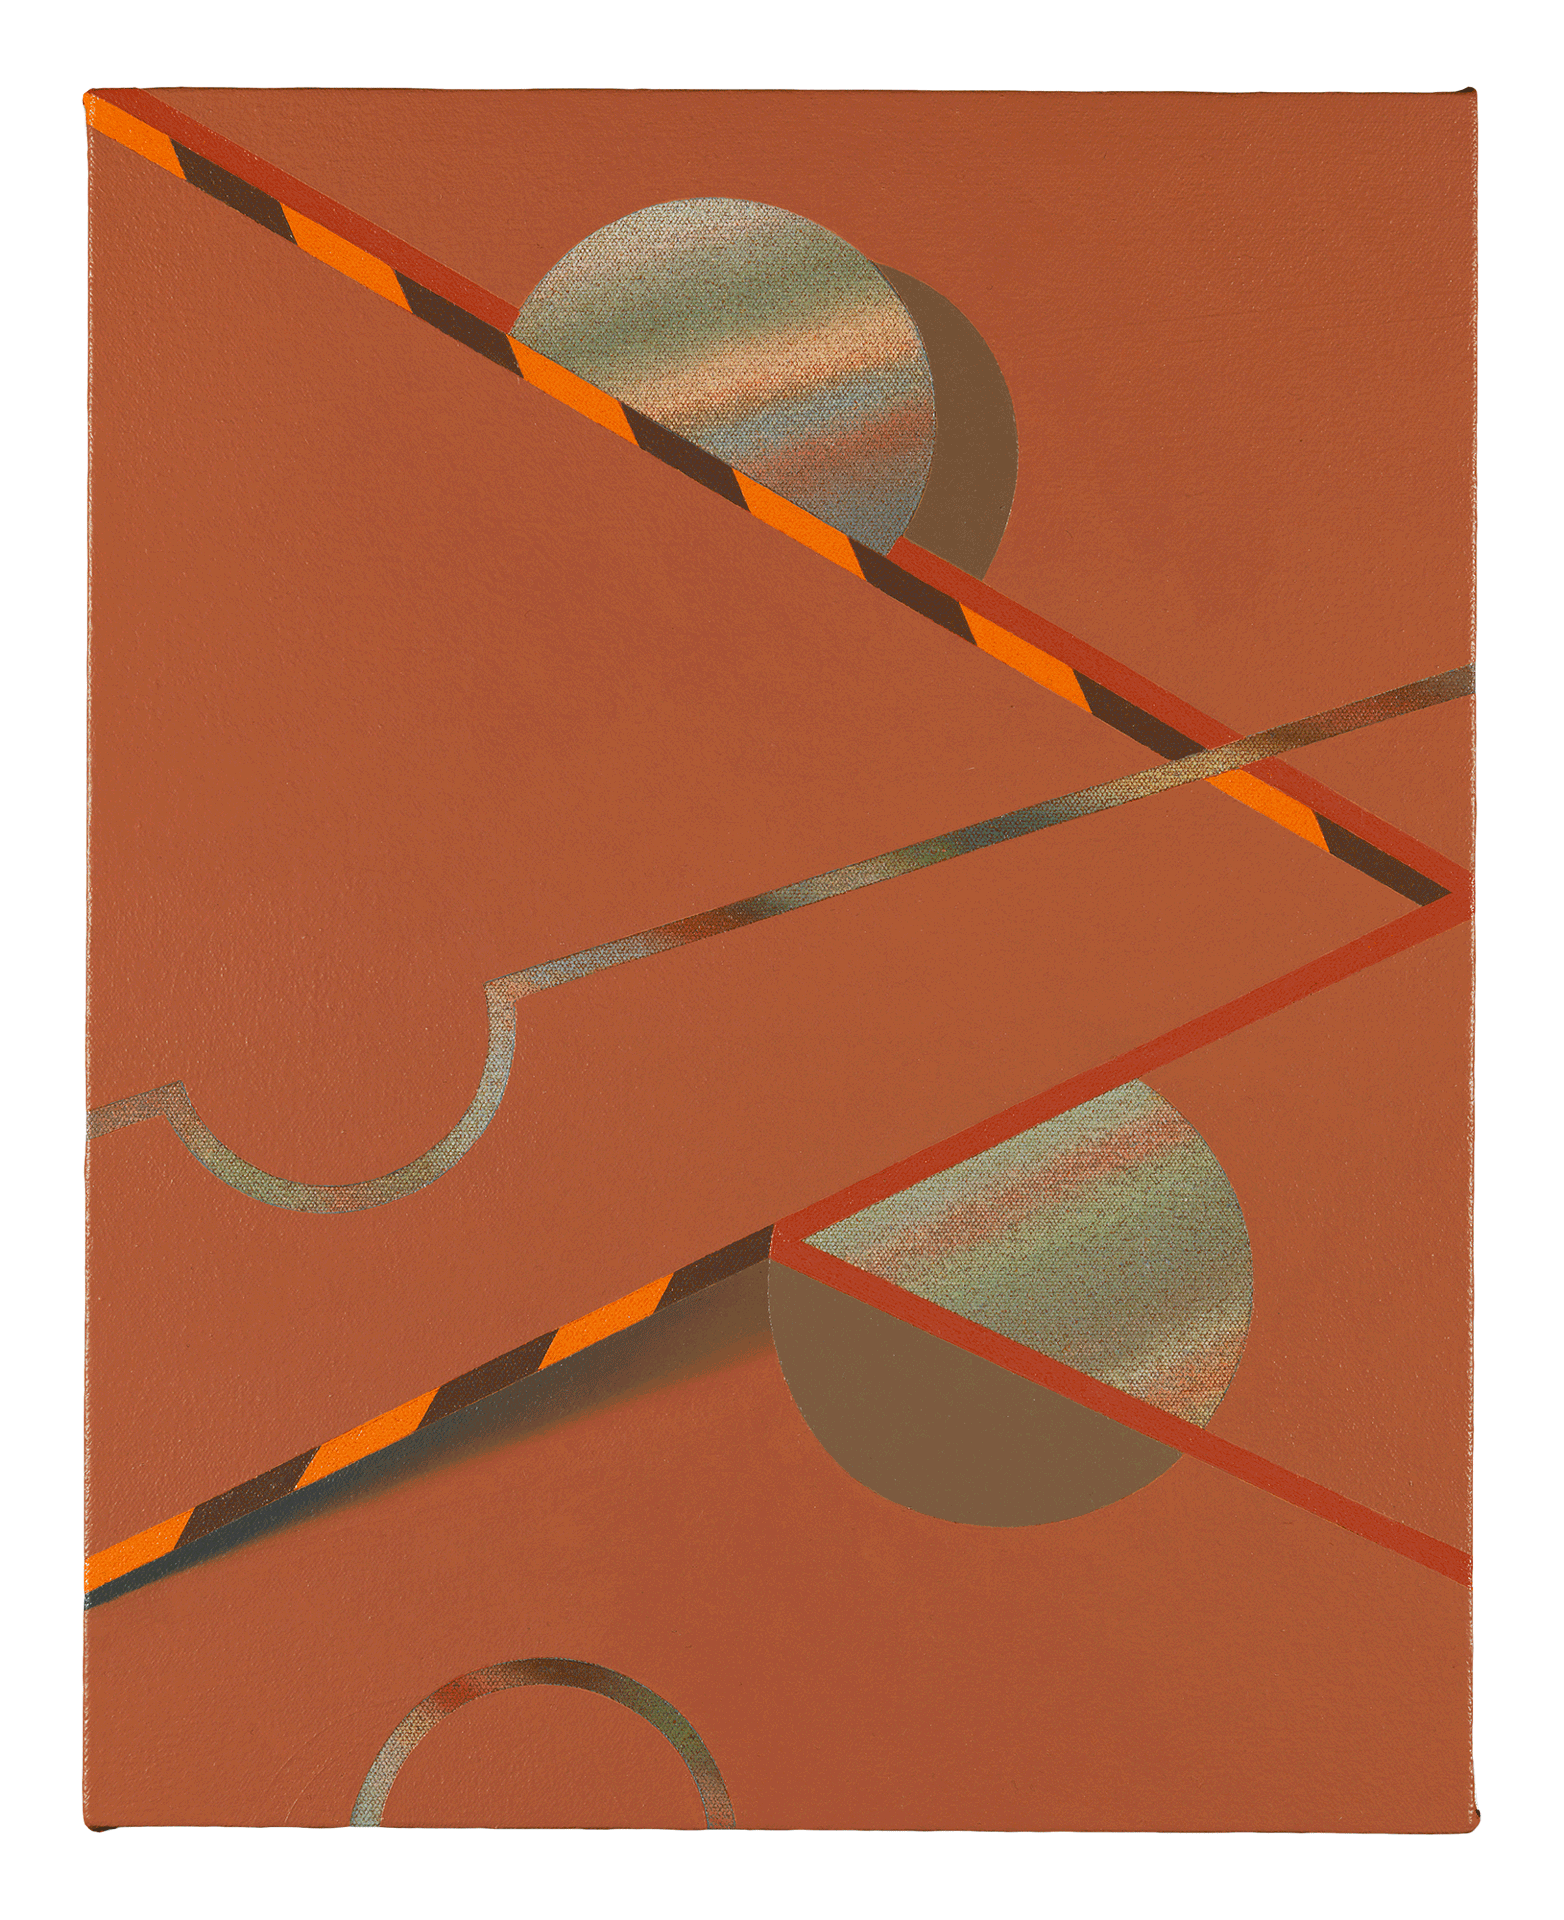 A painting by Tomma Abts, titled Hebo, dated 2013.